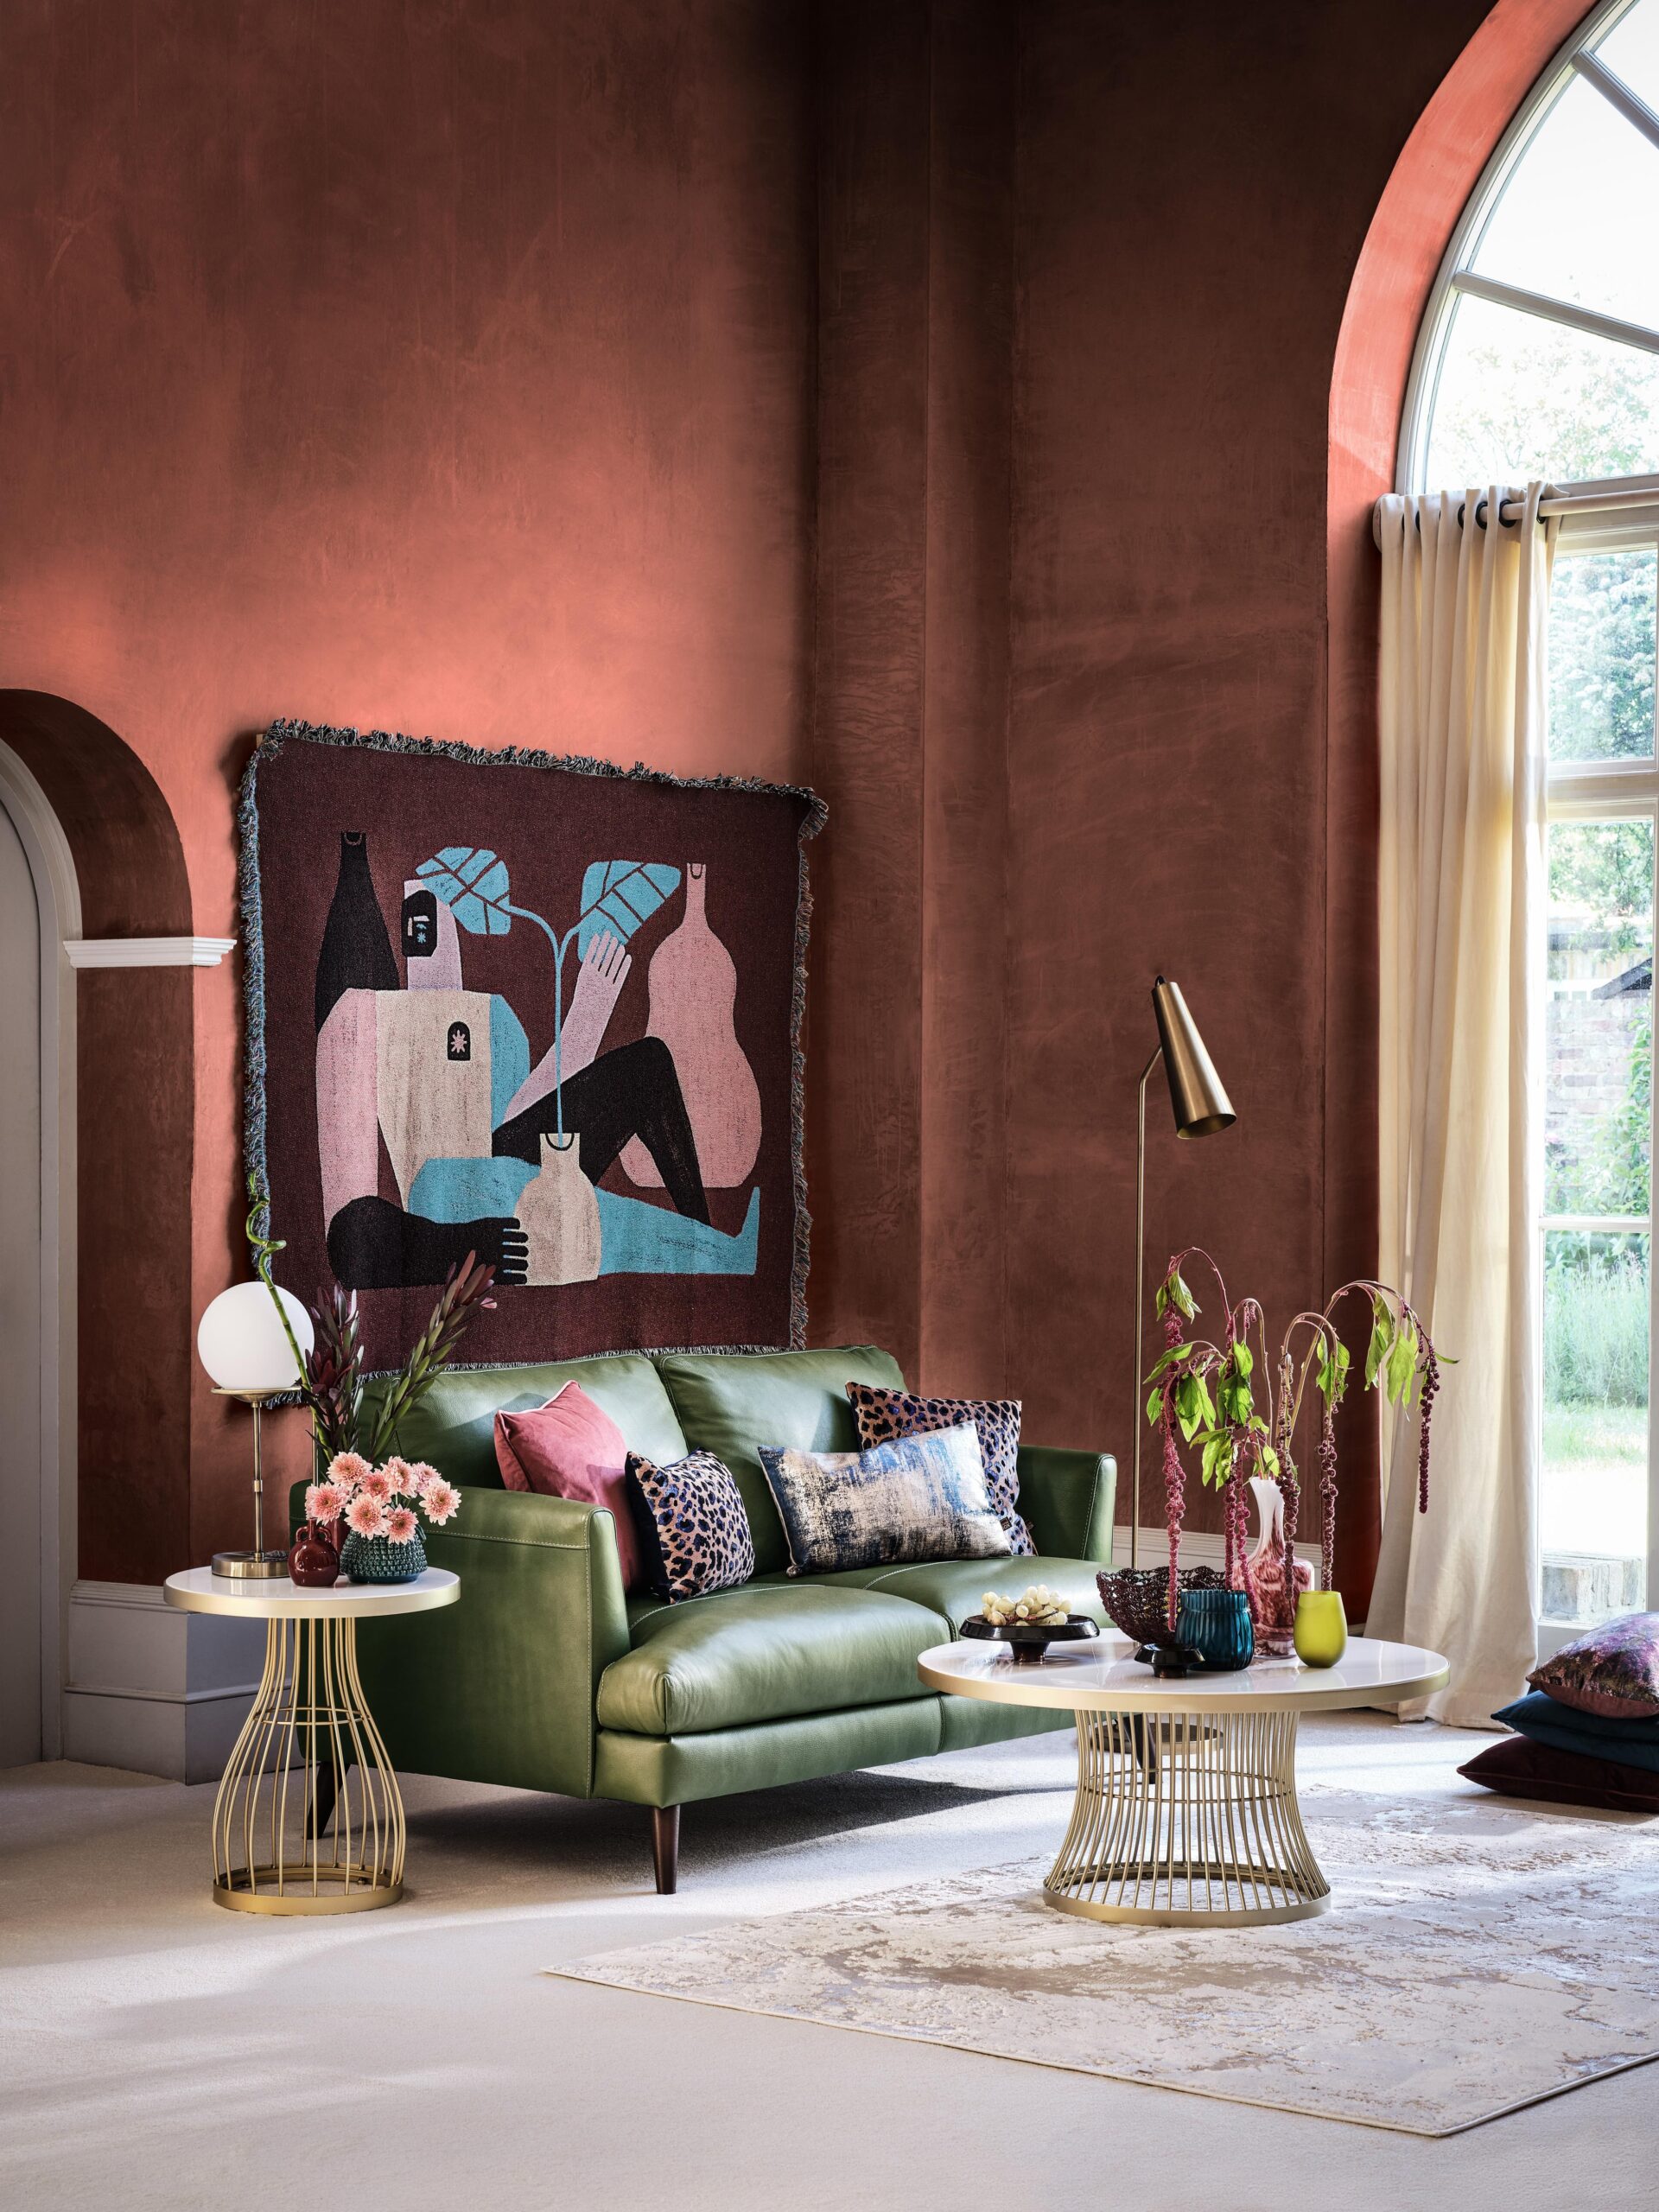 Discover how to pick the best paint colours for every tricky room in your home like living rooms, dark small rooms, small homes and north facing spaces with expert advice from Interior Stylist Maxine Brady.